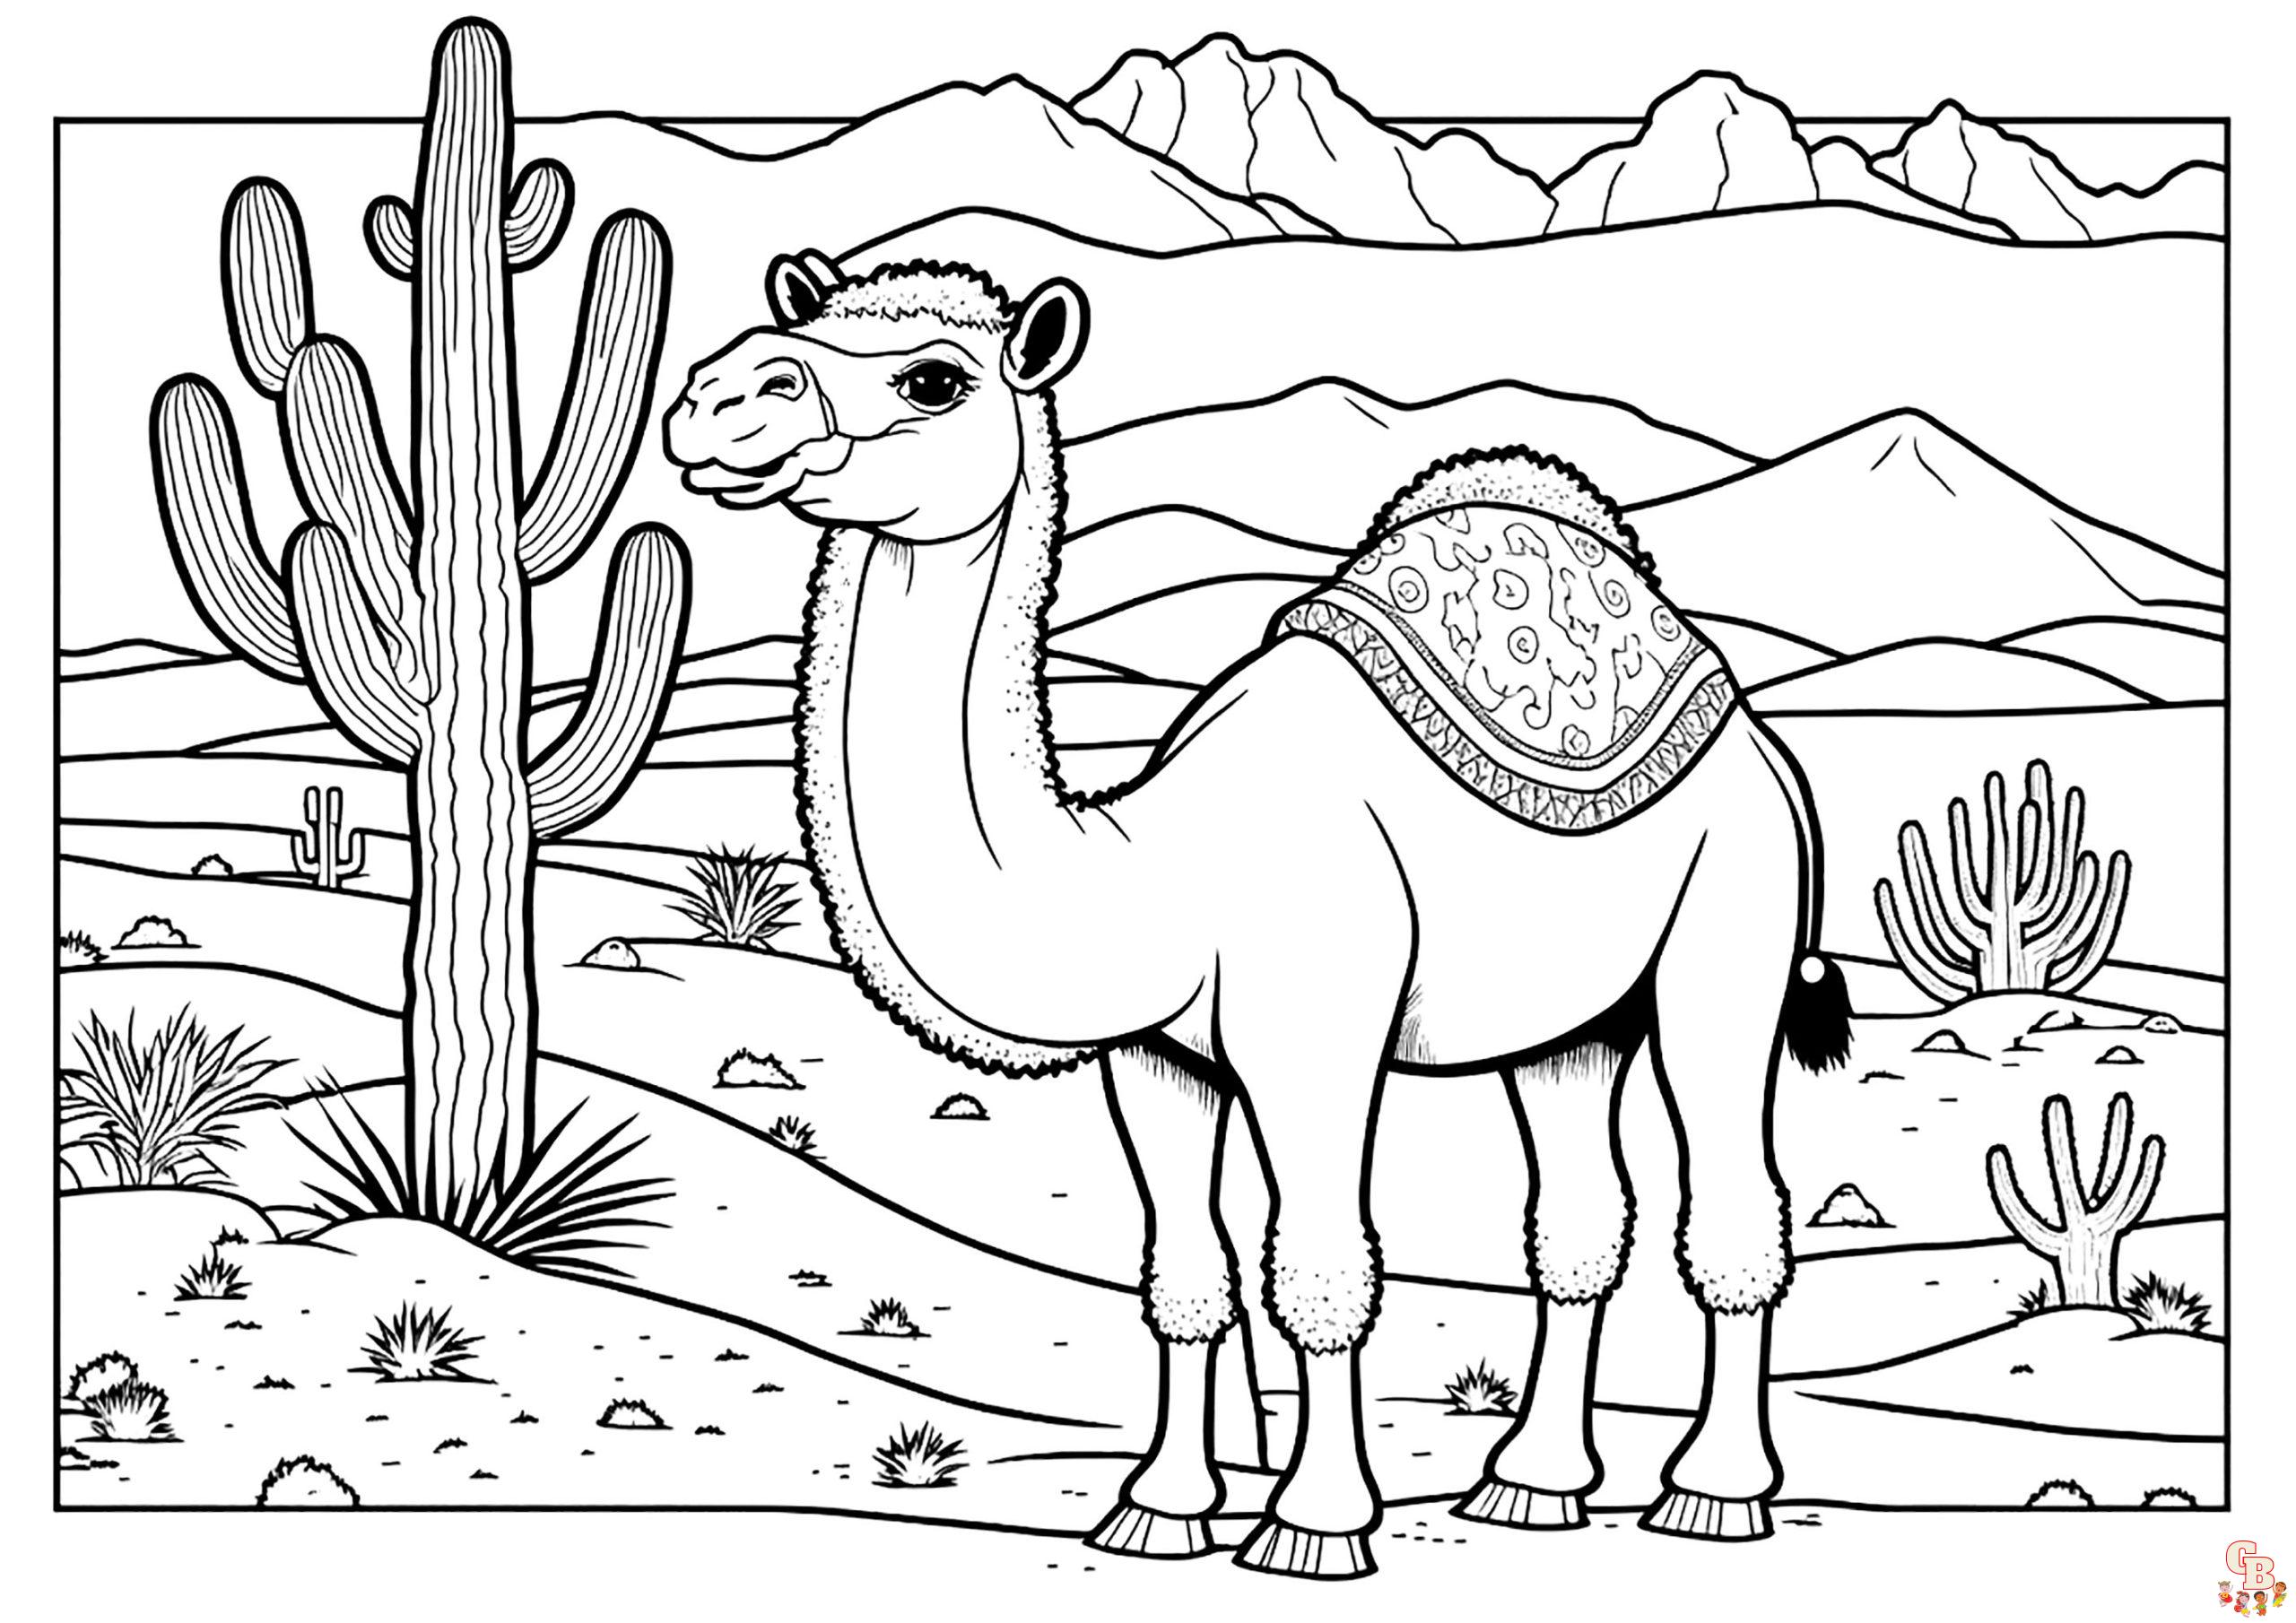 Coloring pages with free printable for kids